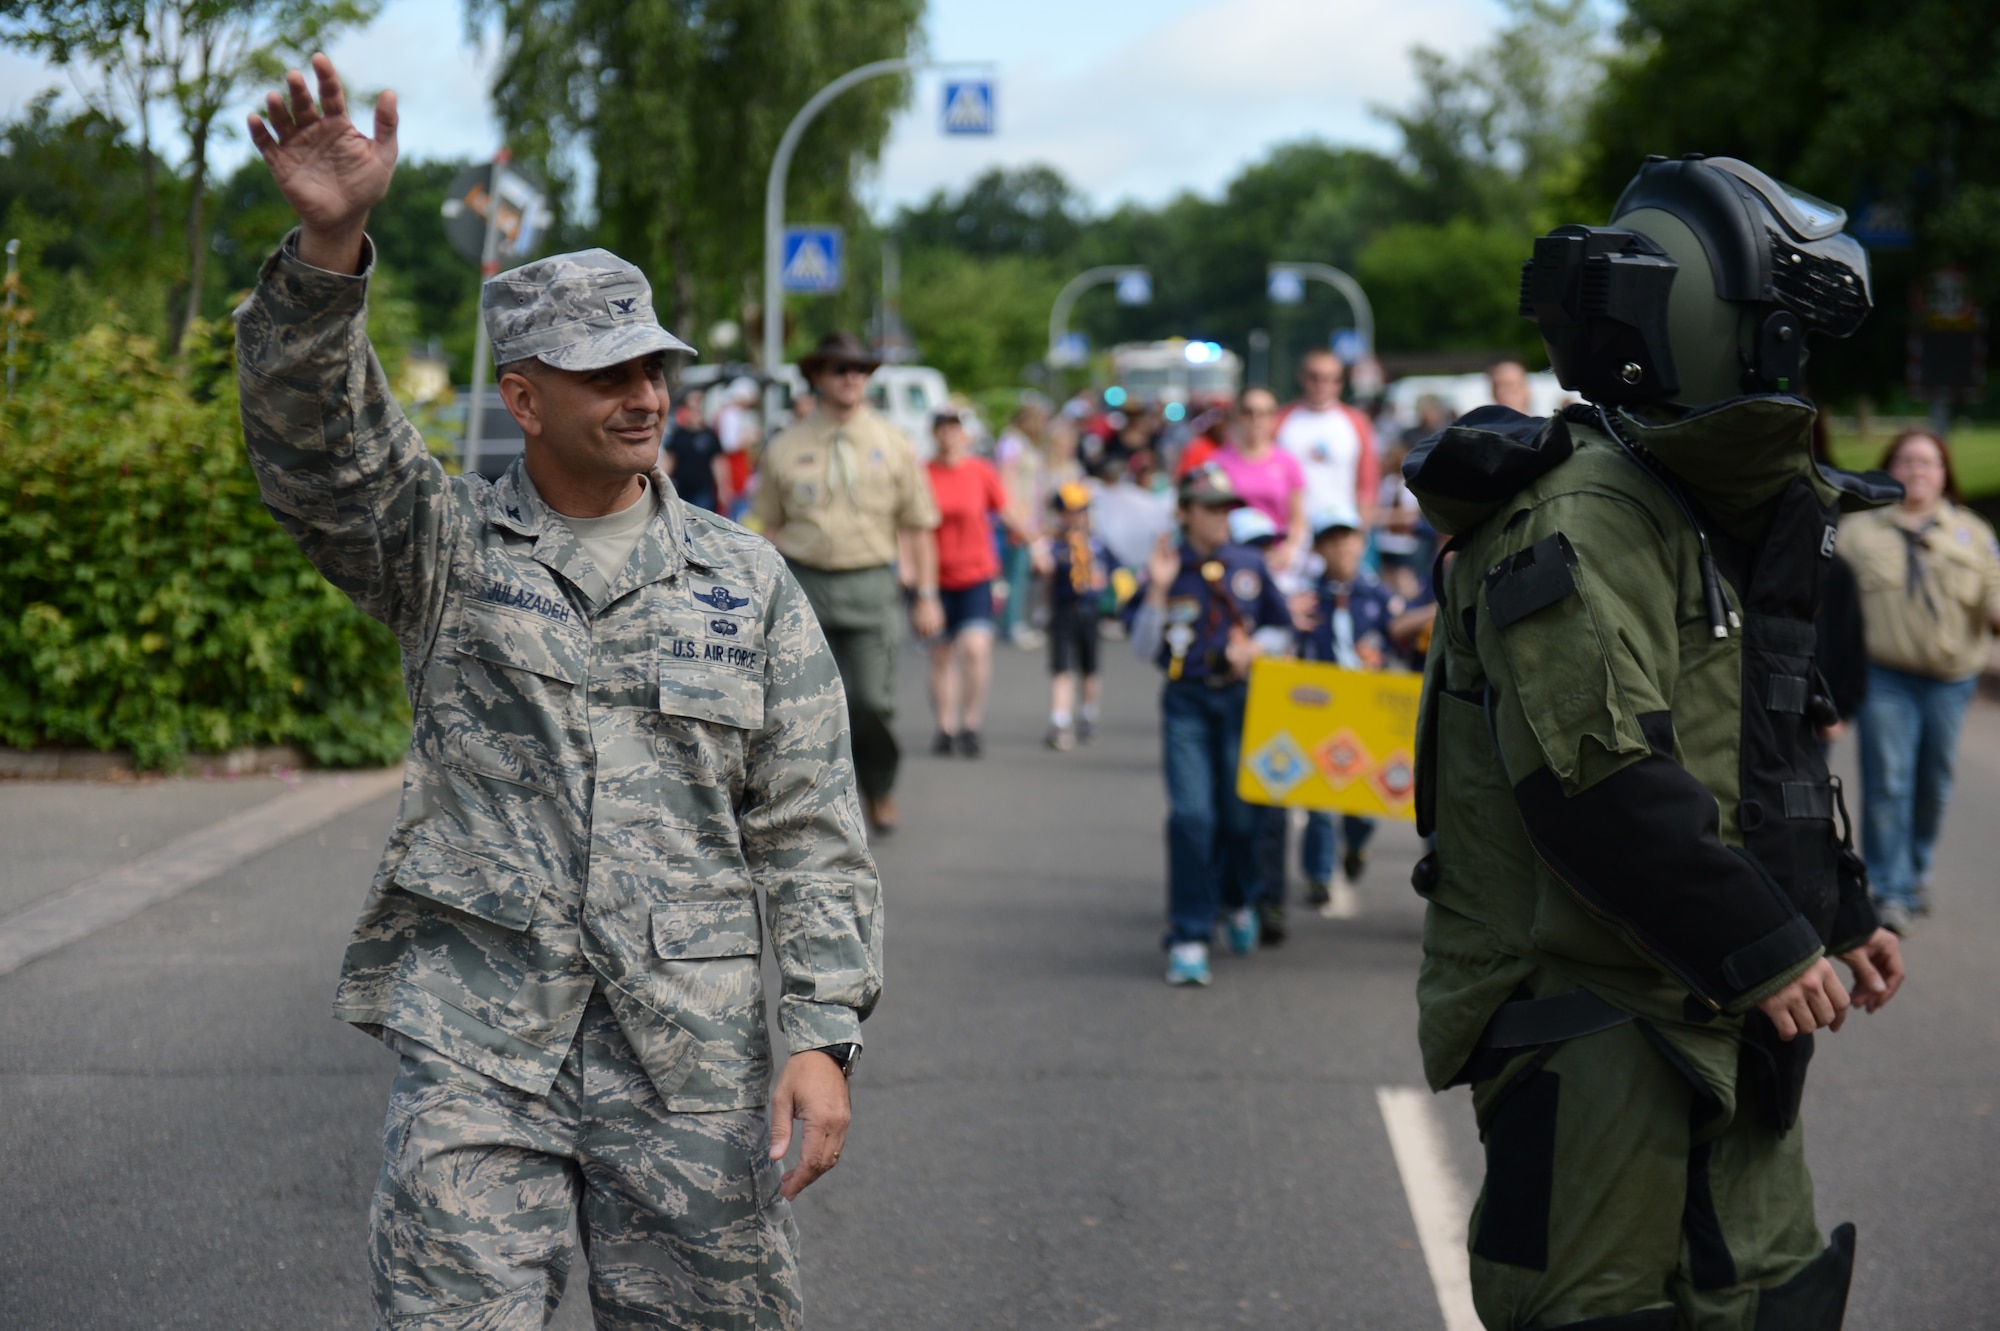 SPANGDAHLEM AIR BASE, Germany – U.S. Air Force Col. David Julazadeh, 52nd Fighter Wing commander, waves to a crowd during a Super Saber Appreciation Day parade July 4, 2013. The parade signified the start of the celebration that would continue on throughout the day. (U.S. Air Force photo by Airman 1st Class Gustavo Castillo/Released)